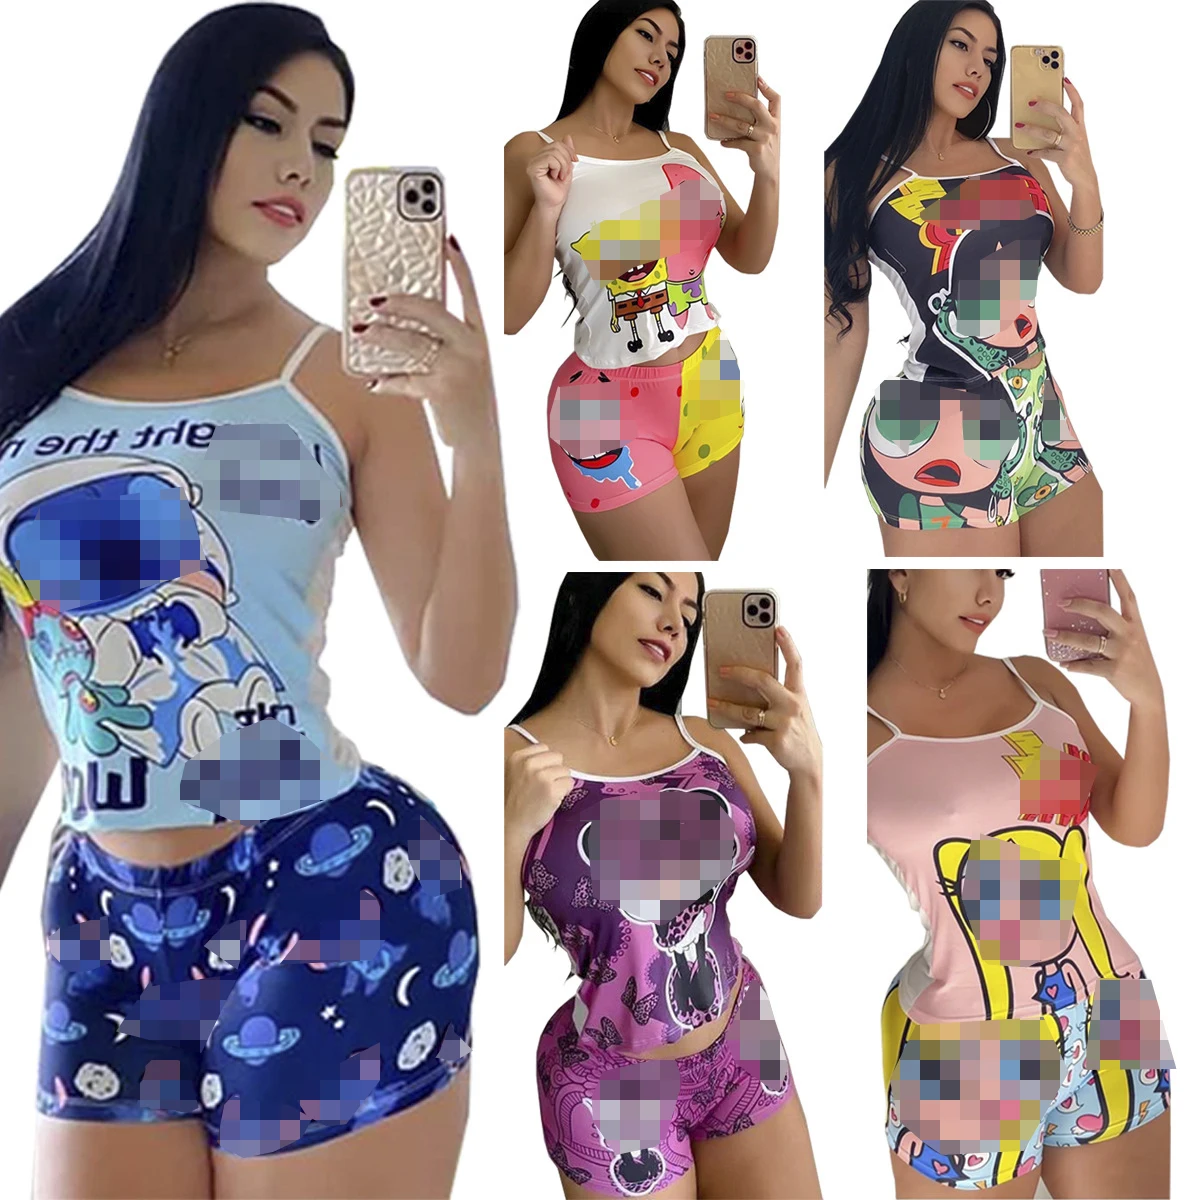 

2021 Summer Tank Top and Shorts Sleep wear Cartoon 2 Piece Pajamas Set loungewear women sets ladies night wear, Picture shows and custom you design color